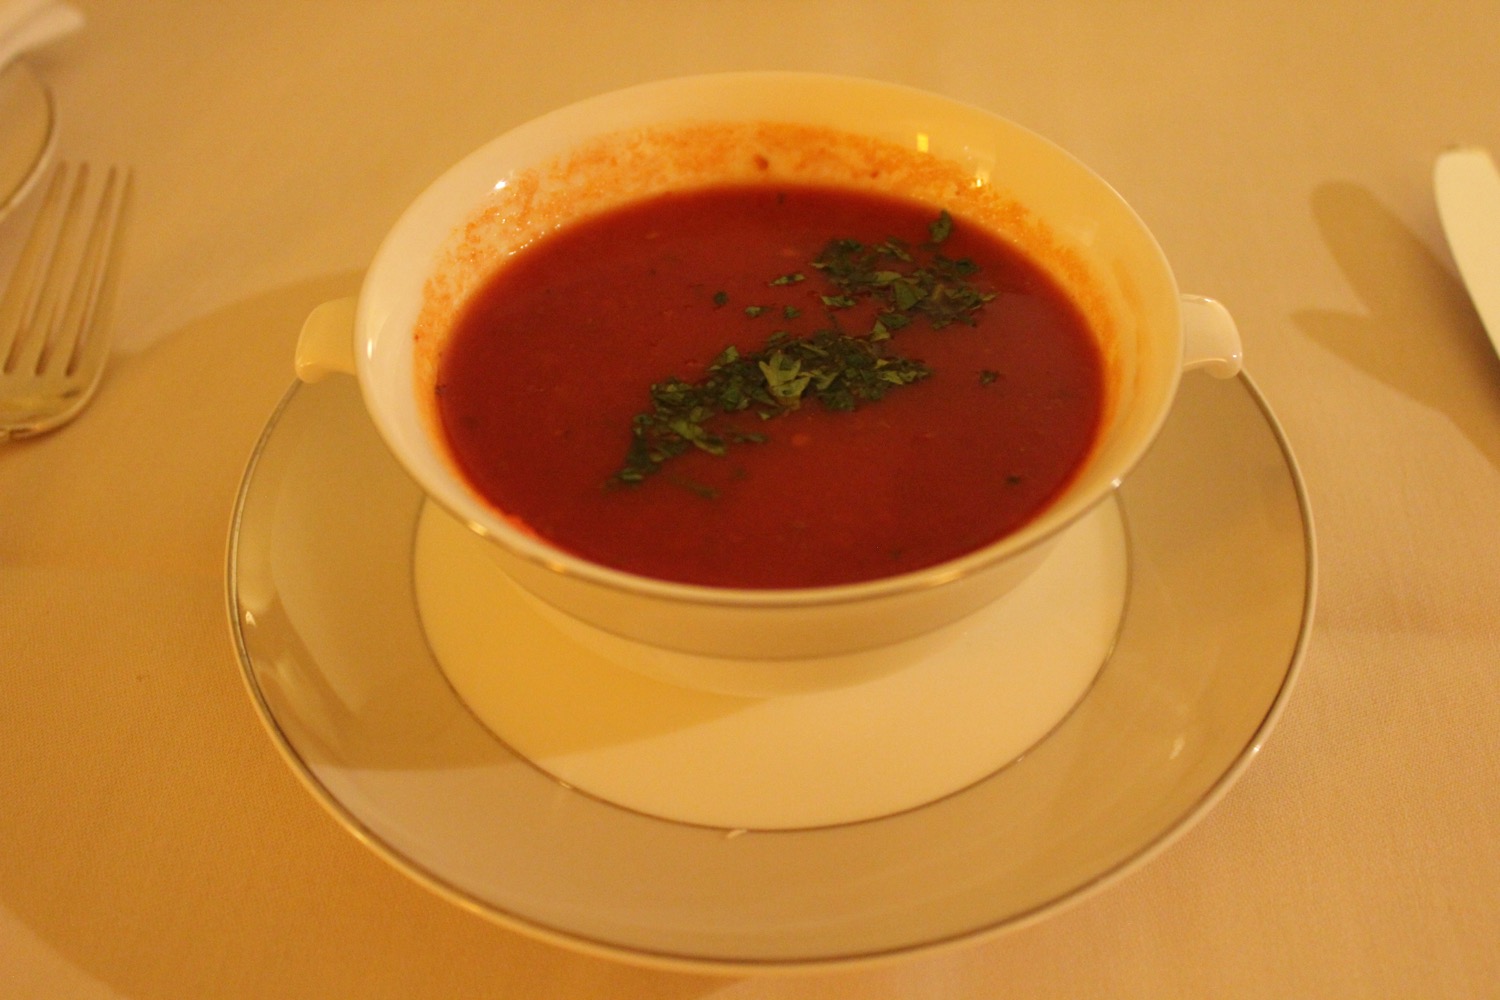 a bowl of soup with a saucer and a plate